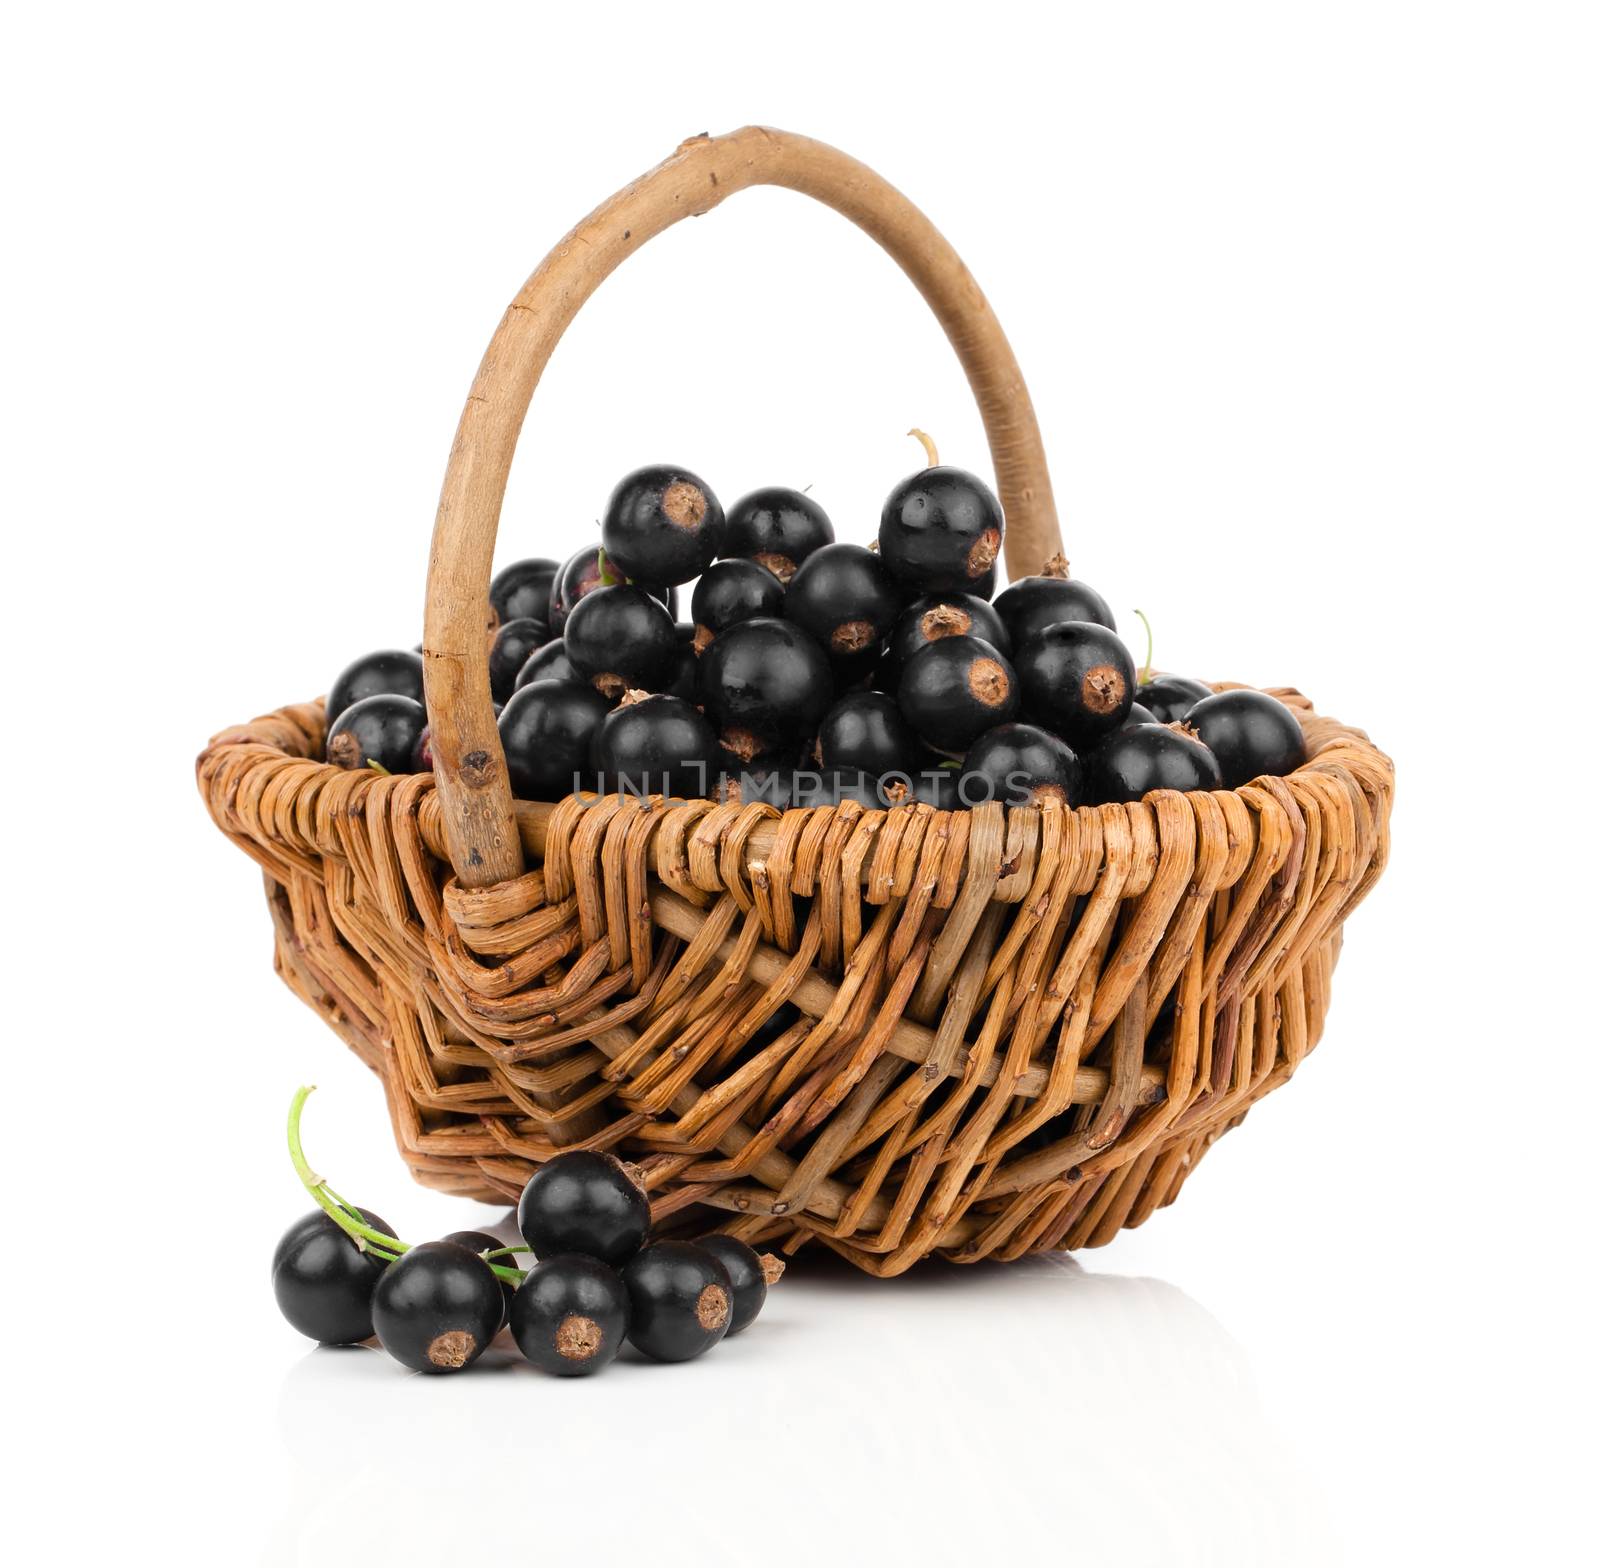 Basket with black currant on a white background by motorolka